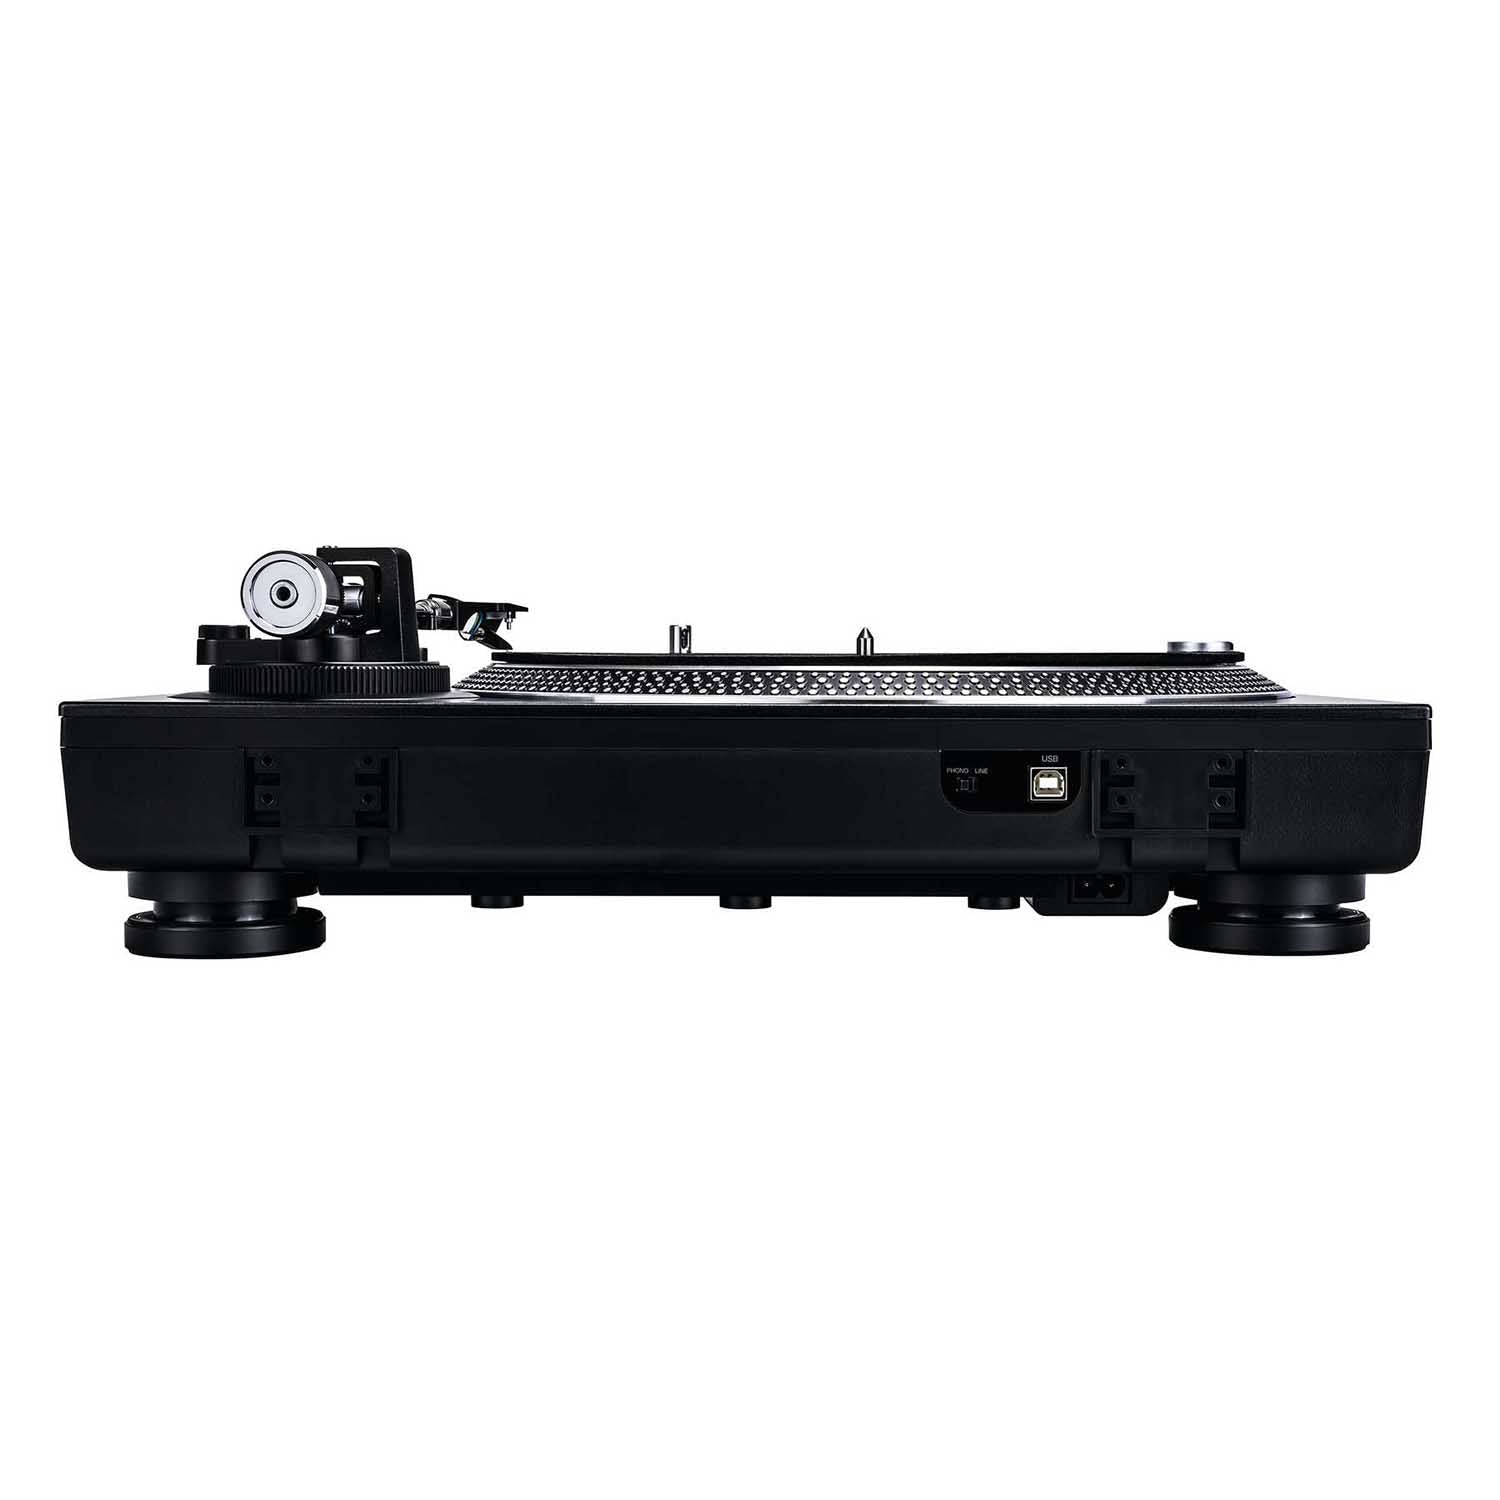 B-Stock: Reloop RP-2000-USB-MK2, Professional Direct Drive USB Turntable System - Hollywood DJ